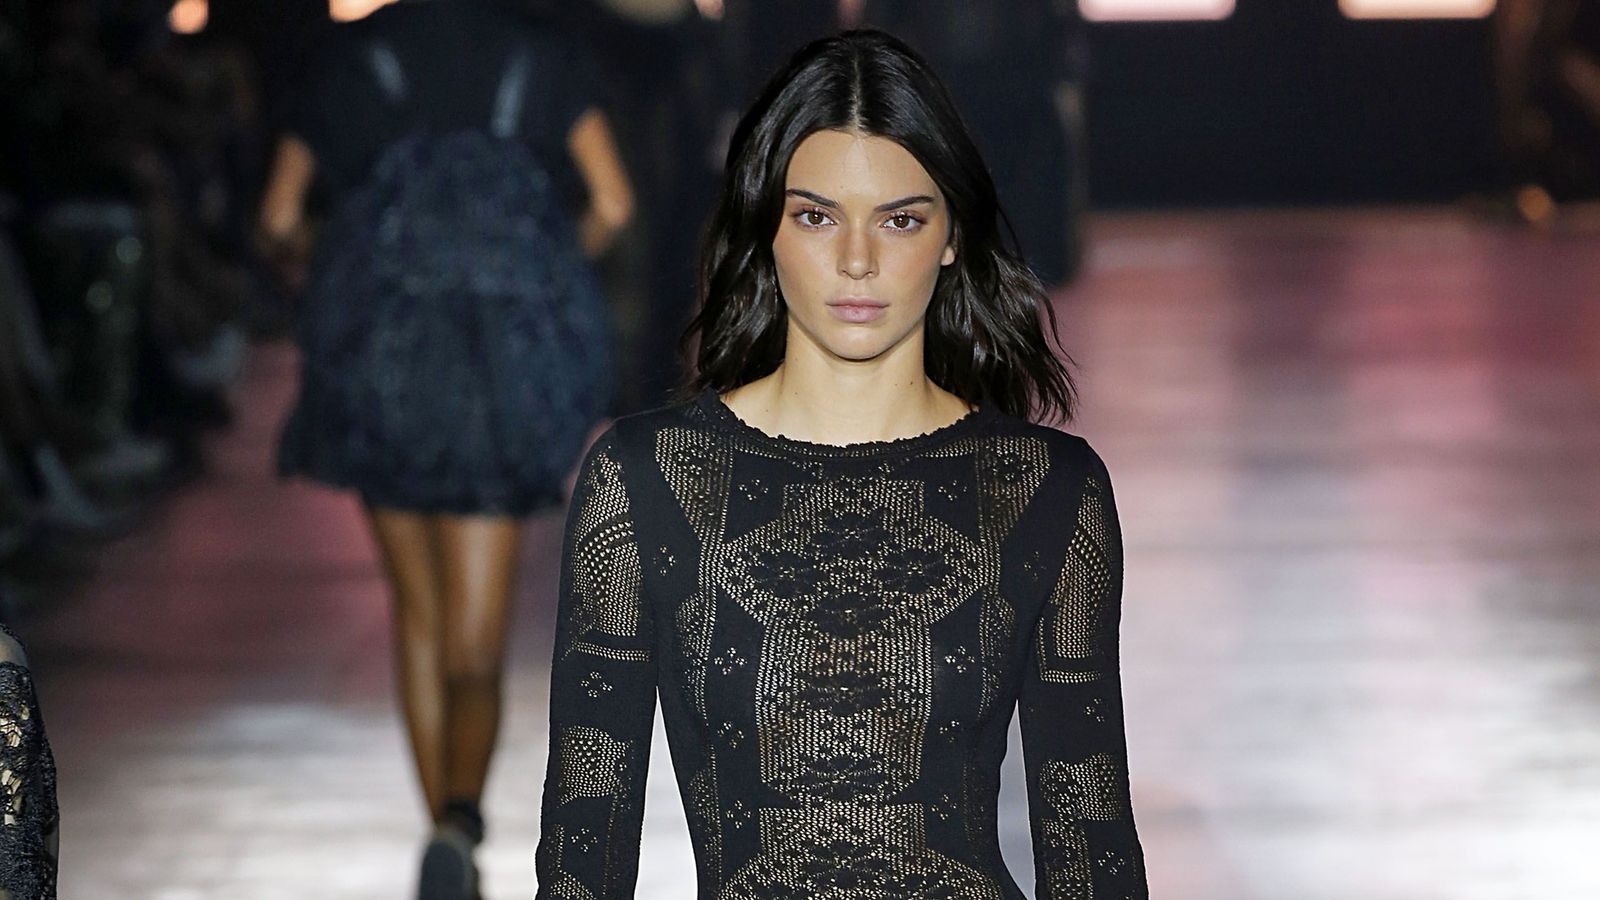 Gigi Hadid and Kendall Jenner Wore Sheer Outfits for Alberta Ferretti's ...